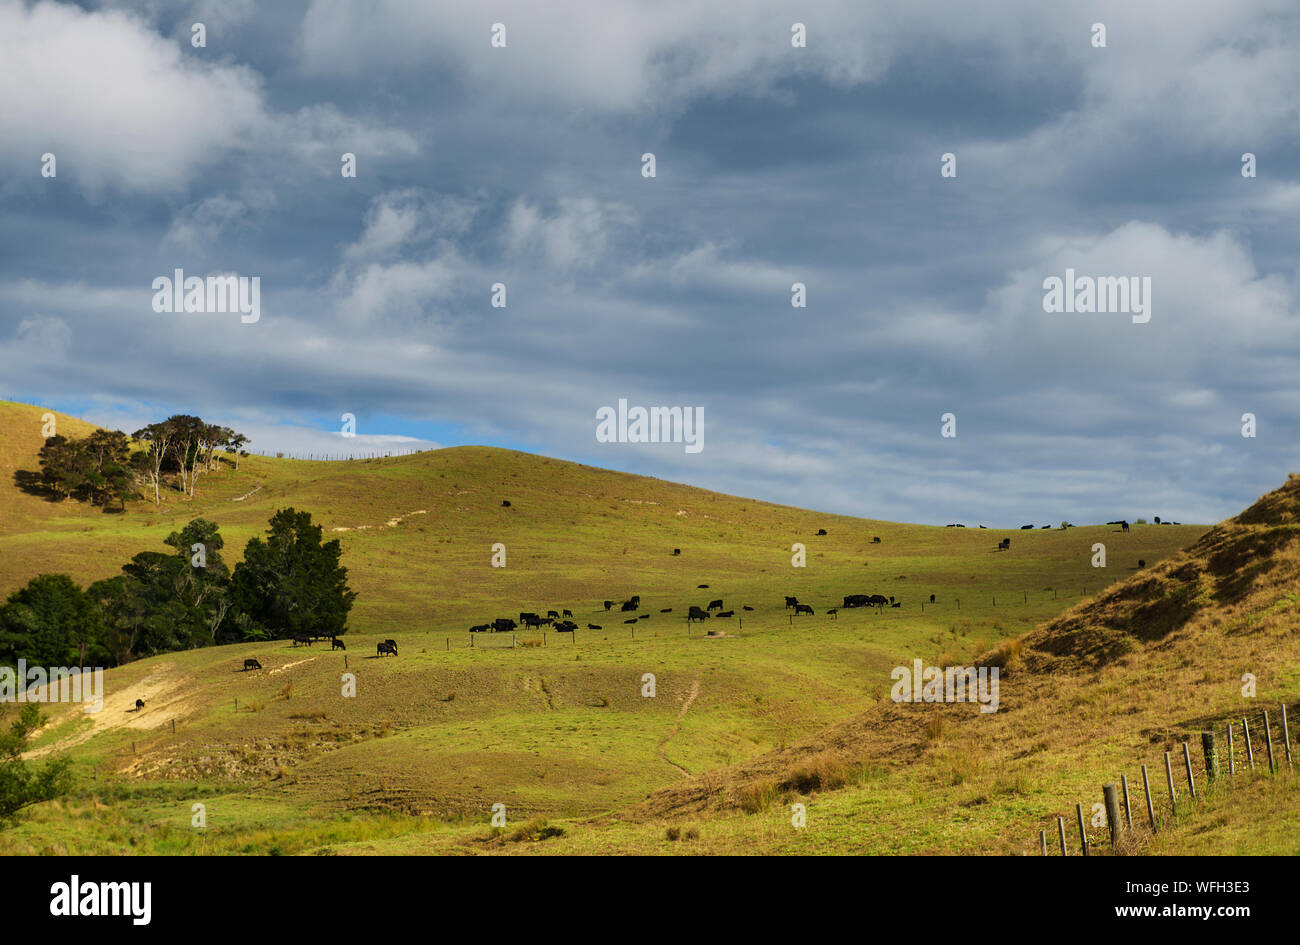 Cows grazing in a field, North Island, New Zealand Stock Photo